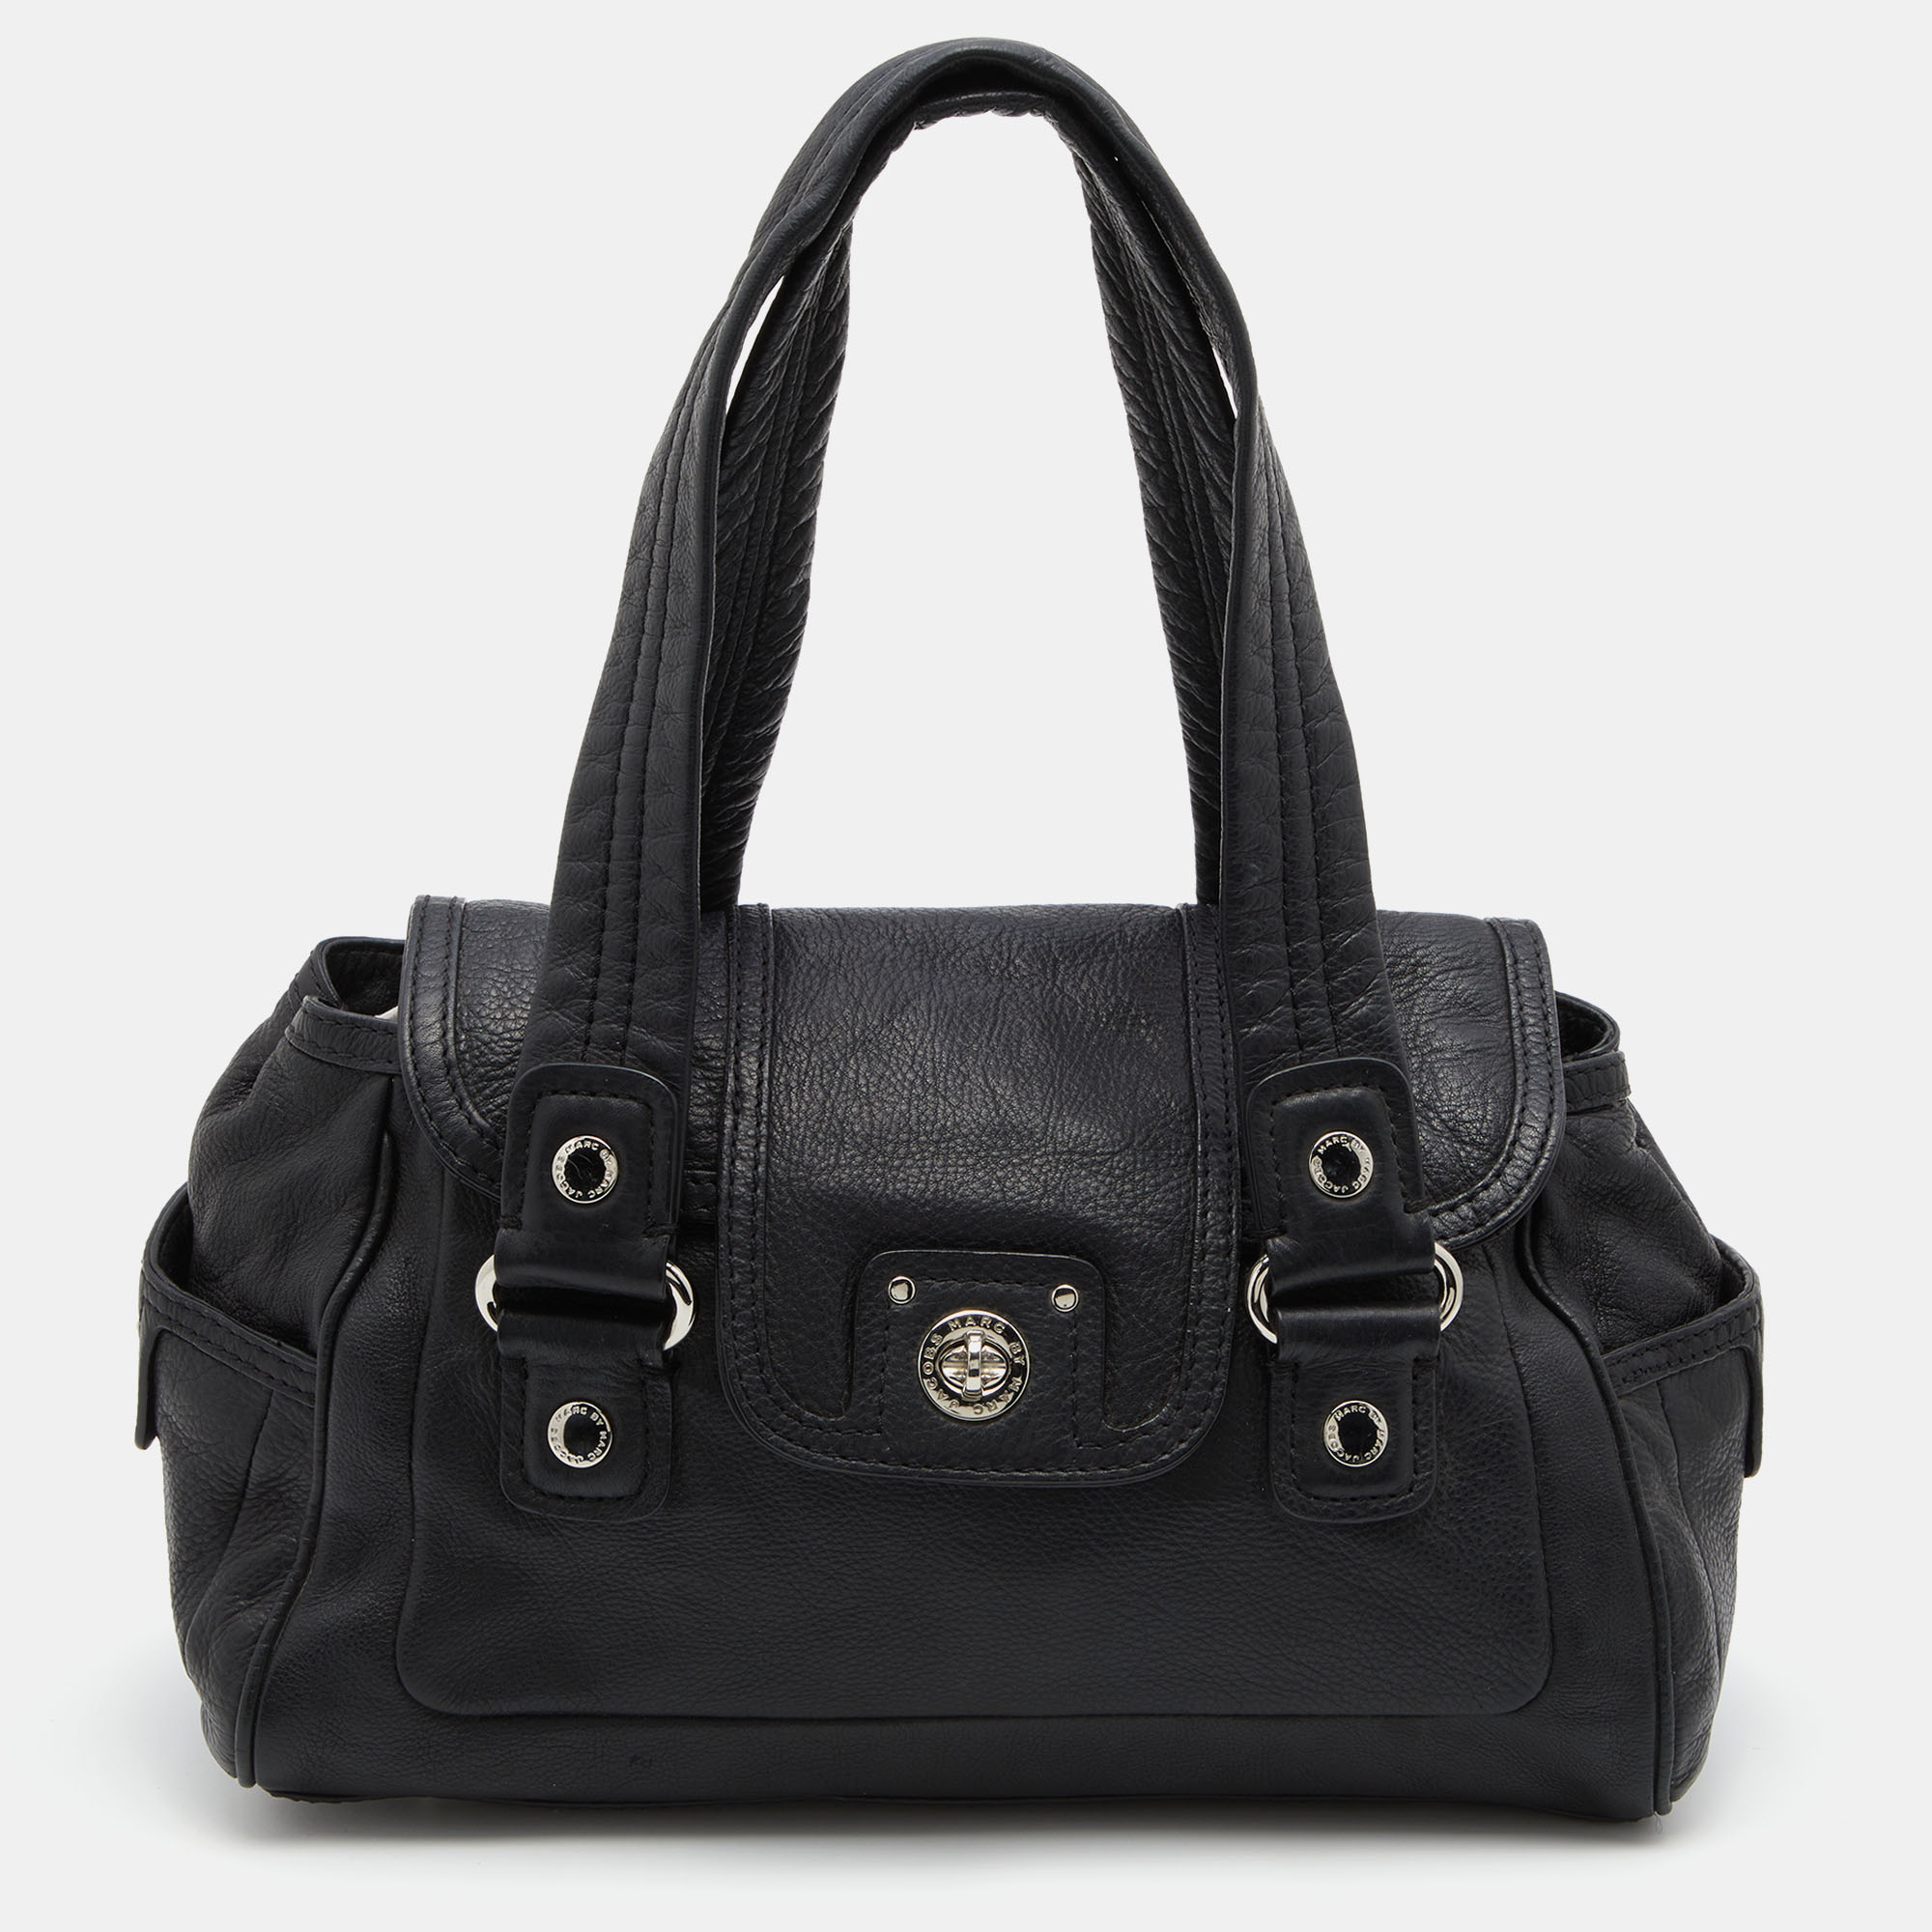 Pre-owned Marc By Marc Jacobs Black Leather Totally Turnlock Benny Satchel